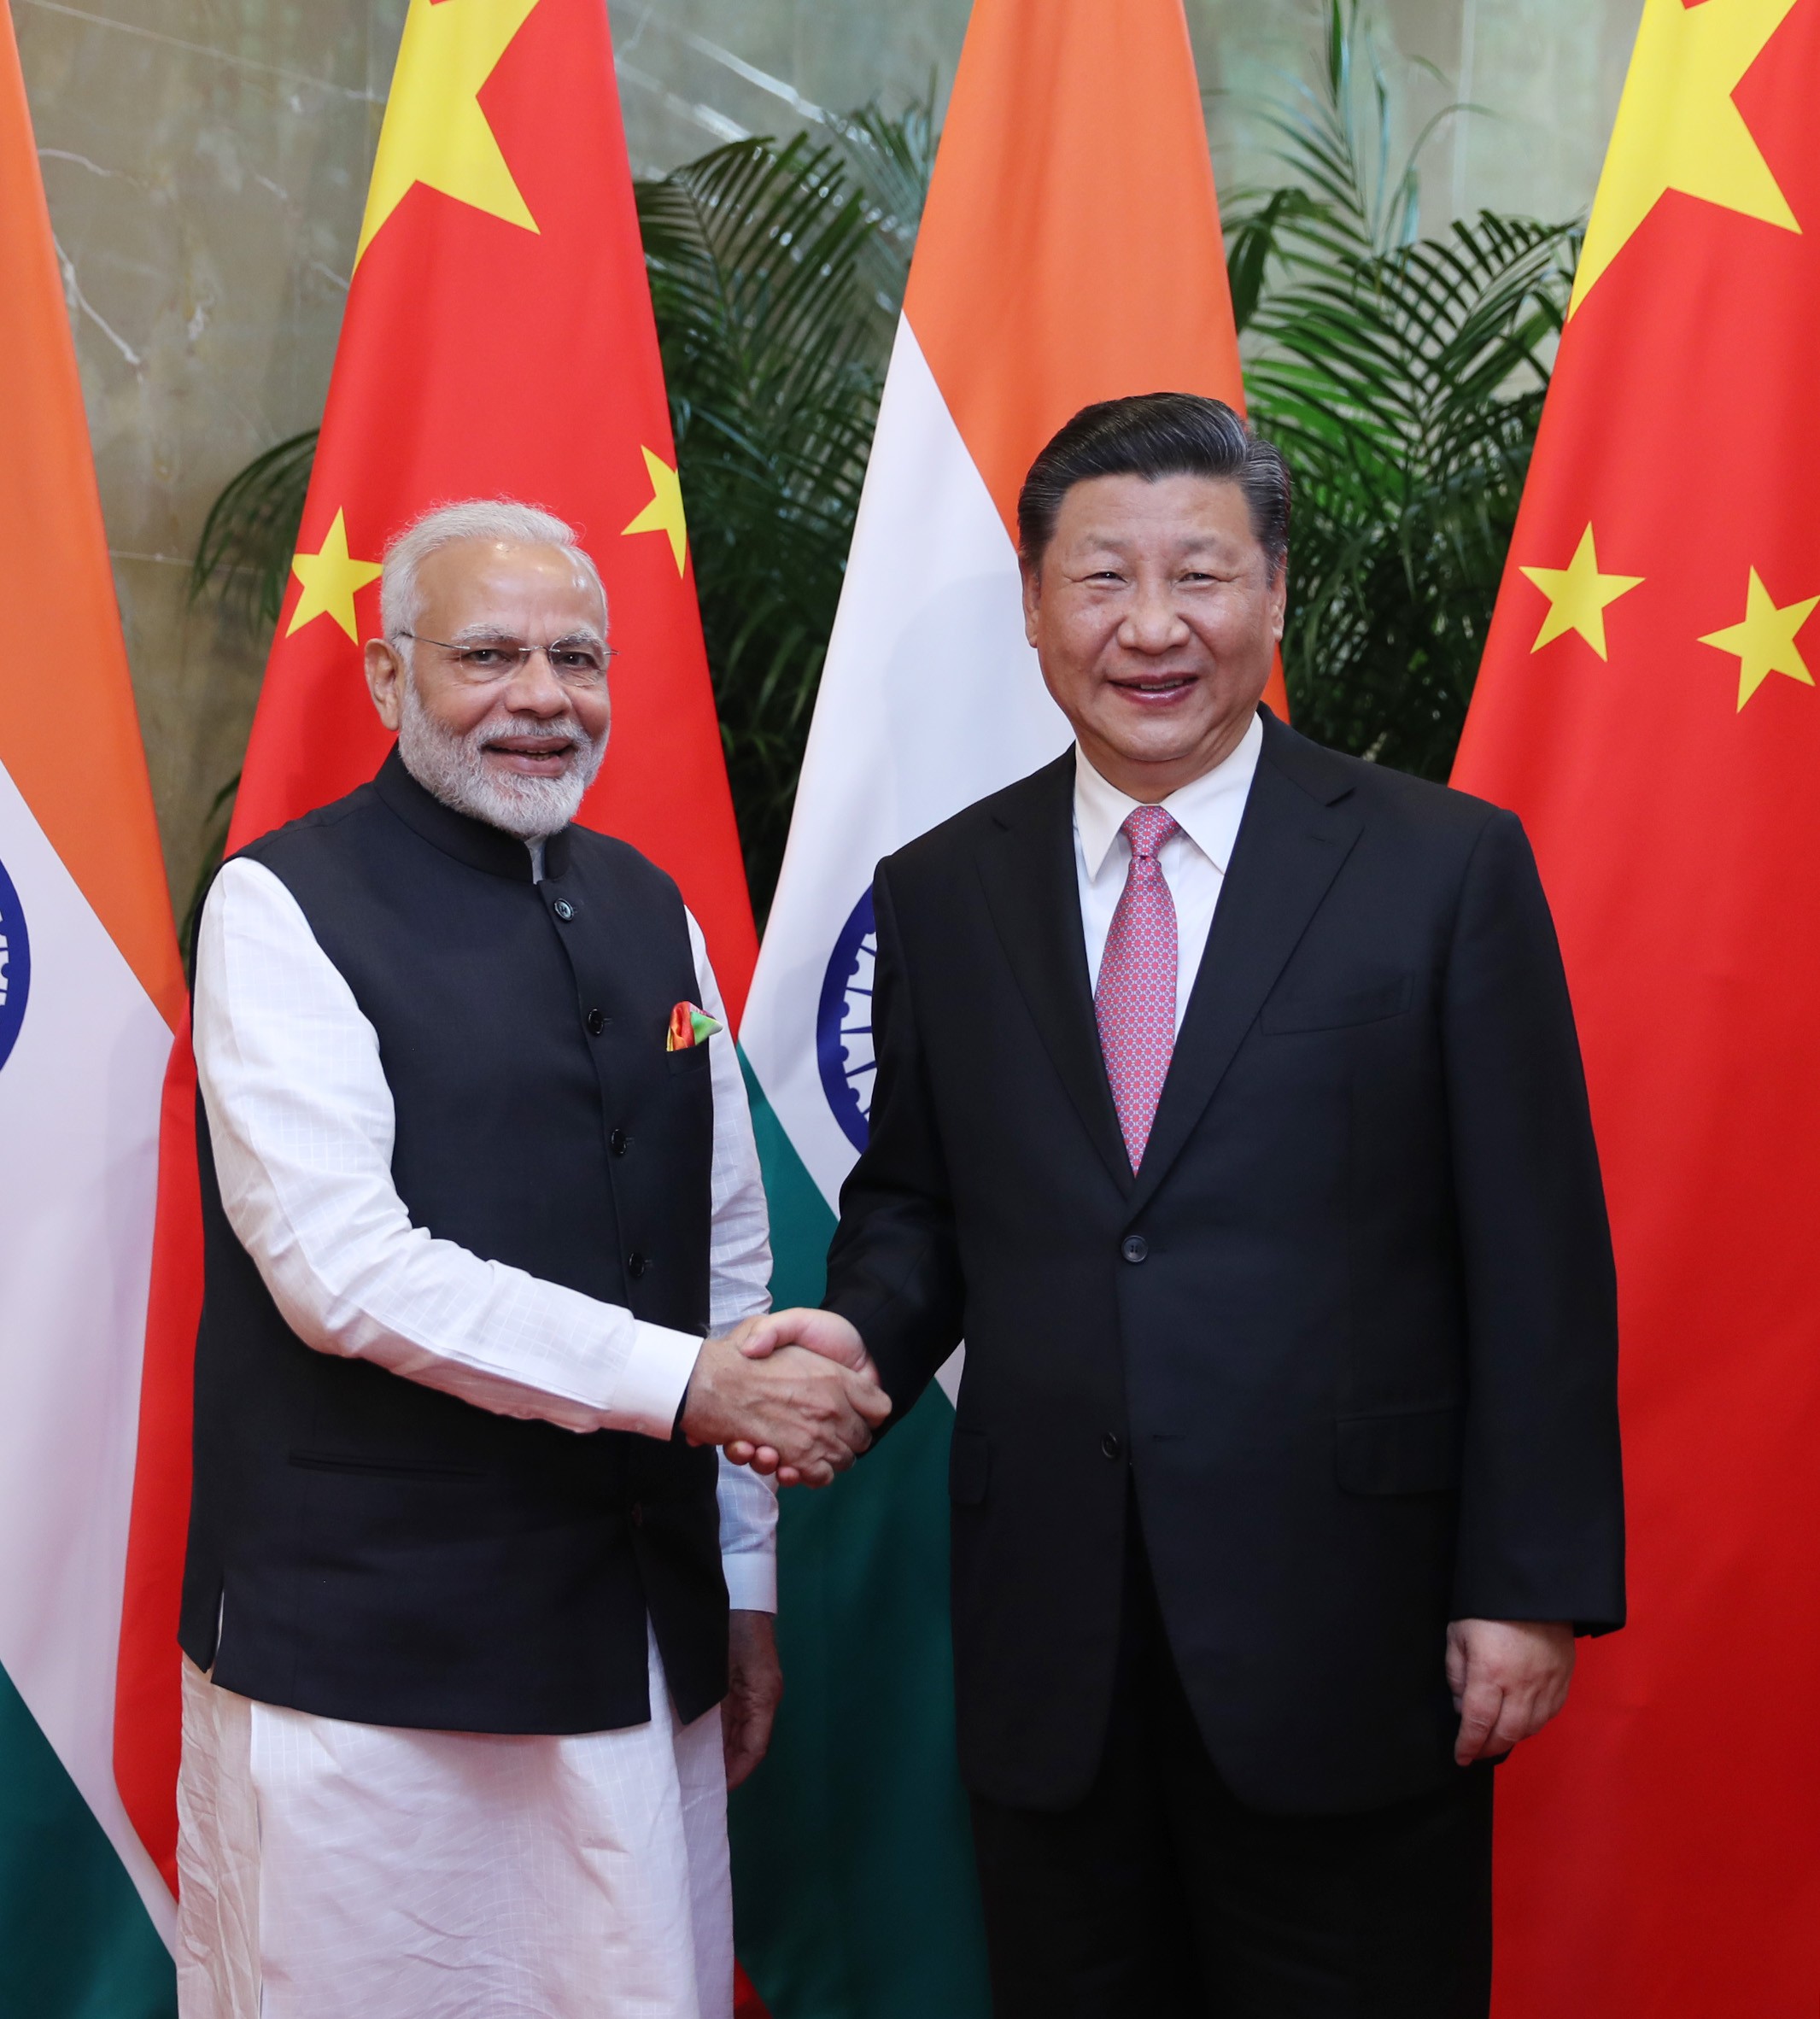 Indian Prime Minister Narendra Modi with Chinese President Xi Jinping in Wuhan, the capital of central China's Hubei Province. Photo: Xinhua